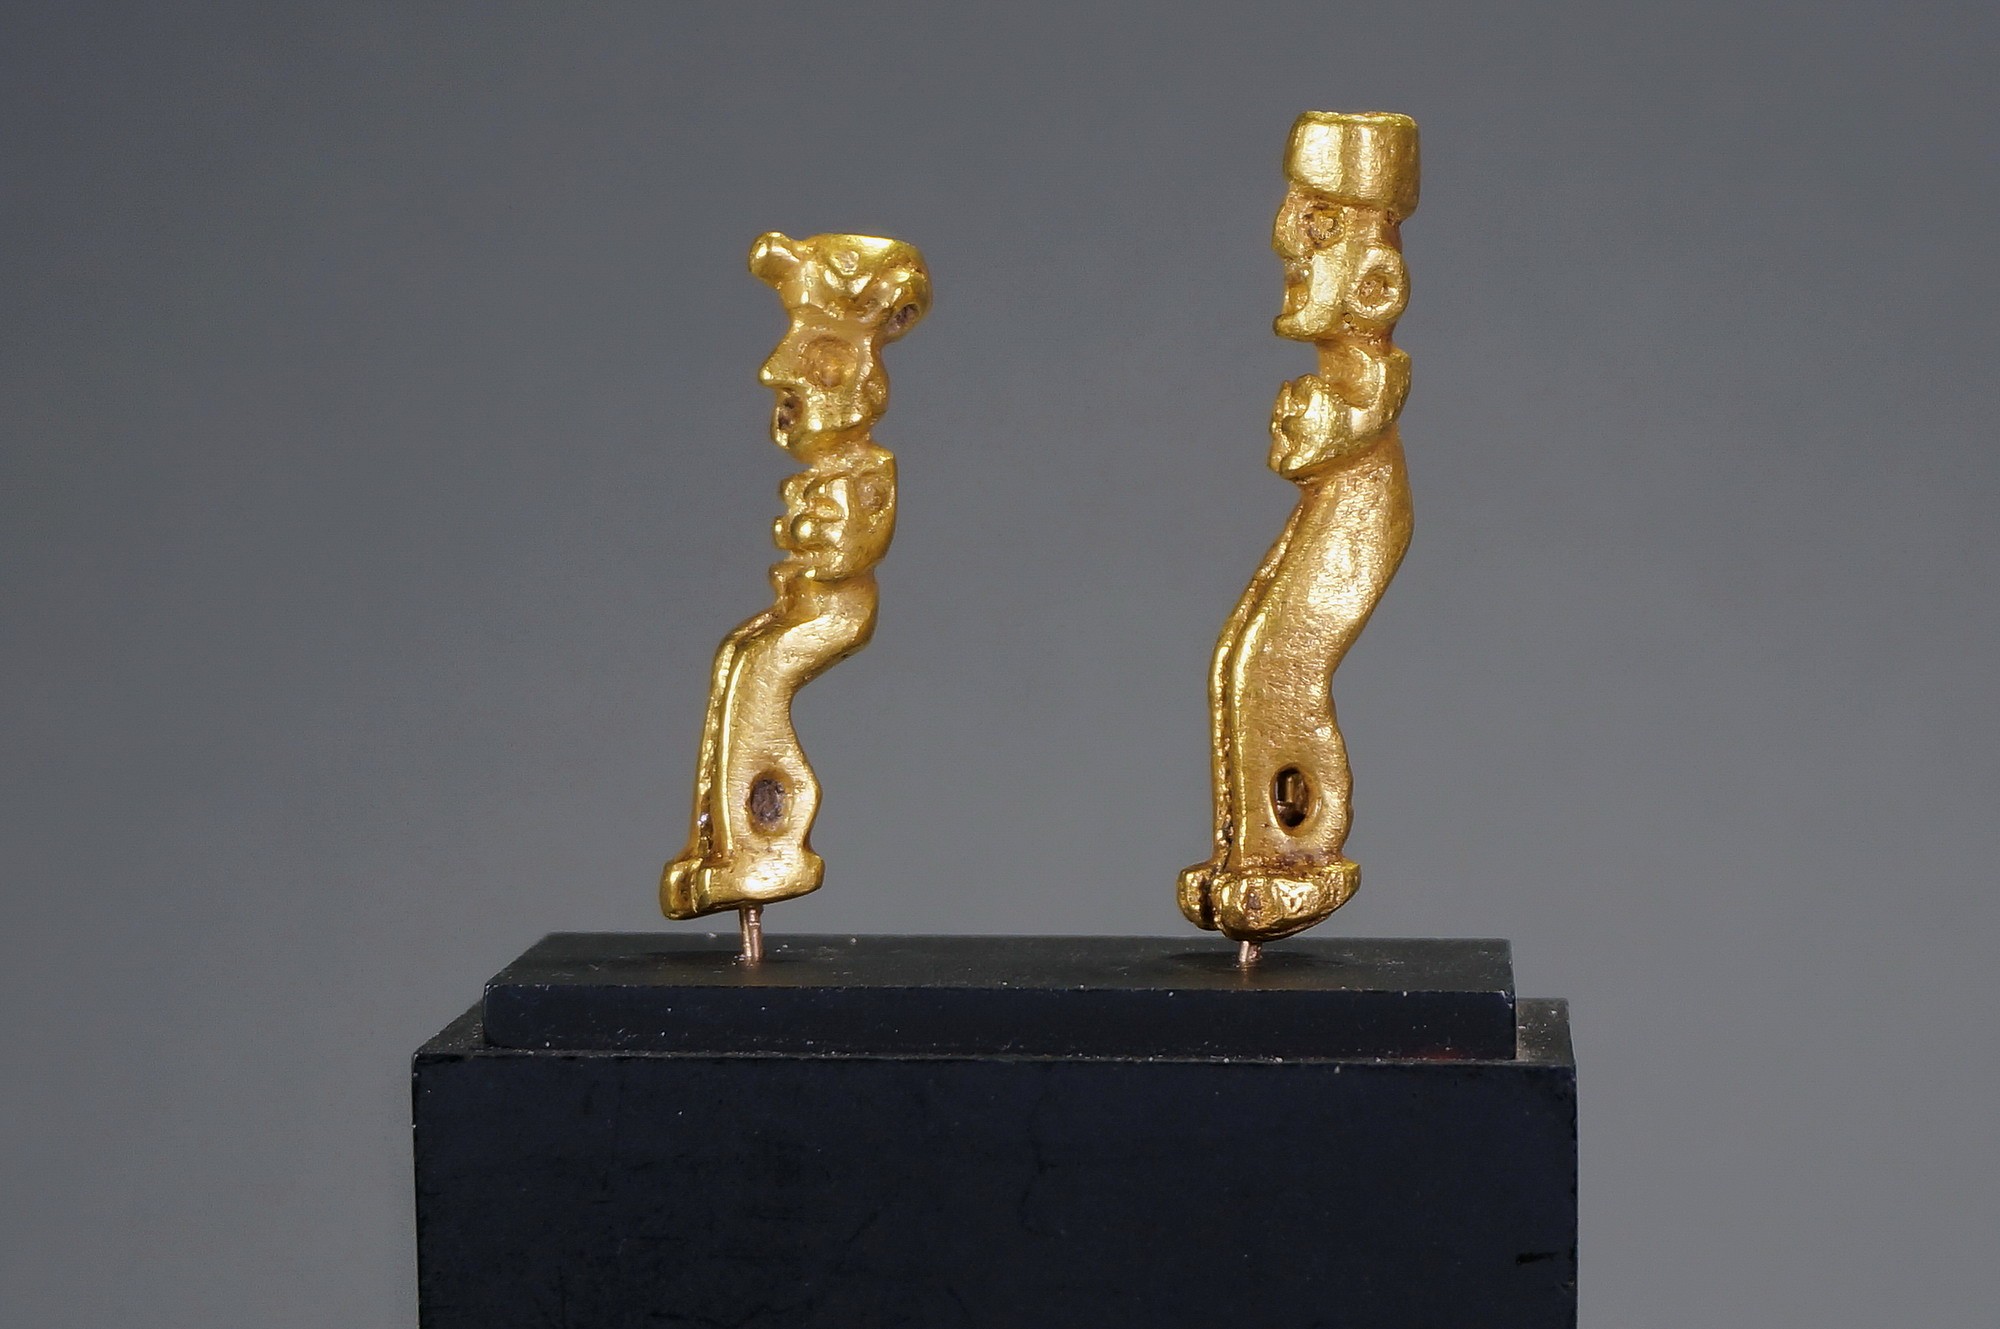 Peru, Two Inca Miniature Cast Gold Standing Figures
These two solid cast gold figures are highly unusual subjects.  Each figure has exaggerated hands and elongated legs.  Both figures have cast suspension holes above the ankles.  The top of each figure has a hollow shape that could have been used to insert feathers.  The only other example illustrated is in Oro del Antiguo Peru, lamina 210 (7 cm or 2.75").  One figure is wearing a headdress with a feline motif and the other one with a simple cylindrical shape.  Ex. New York collector, prior to 1970.
Media: Metal
Dimensions: Height:1.5" and 1.75"; Weight: 24 grams for pair.
$6,500
n7028